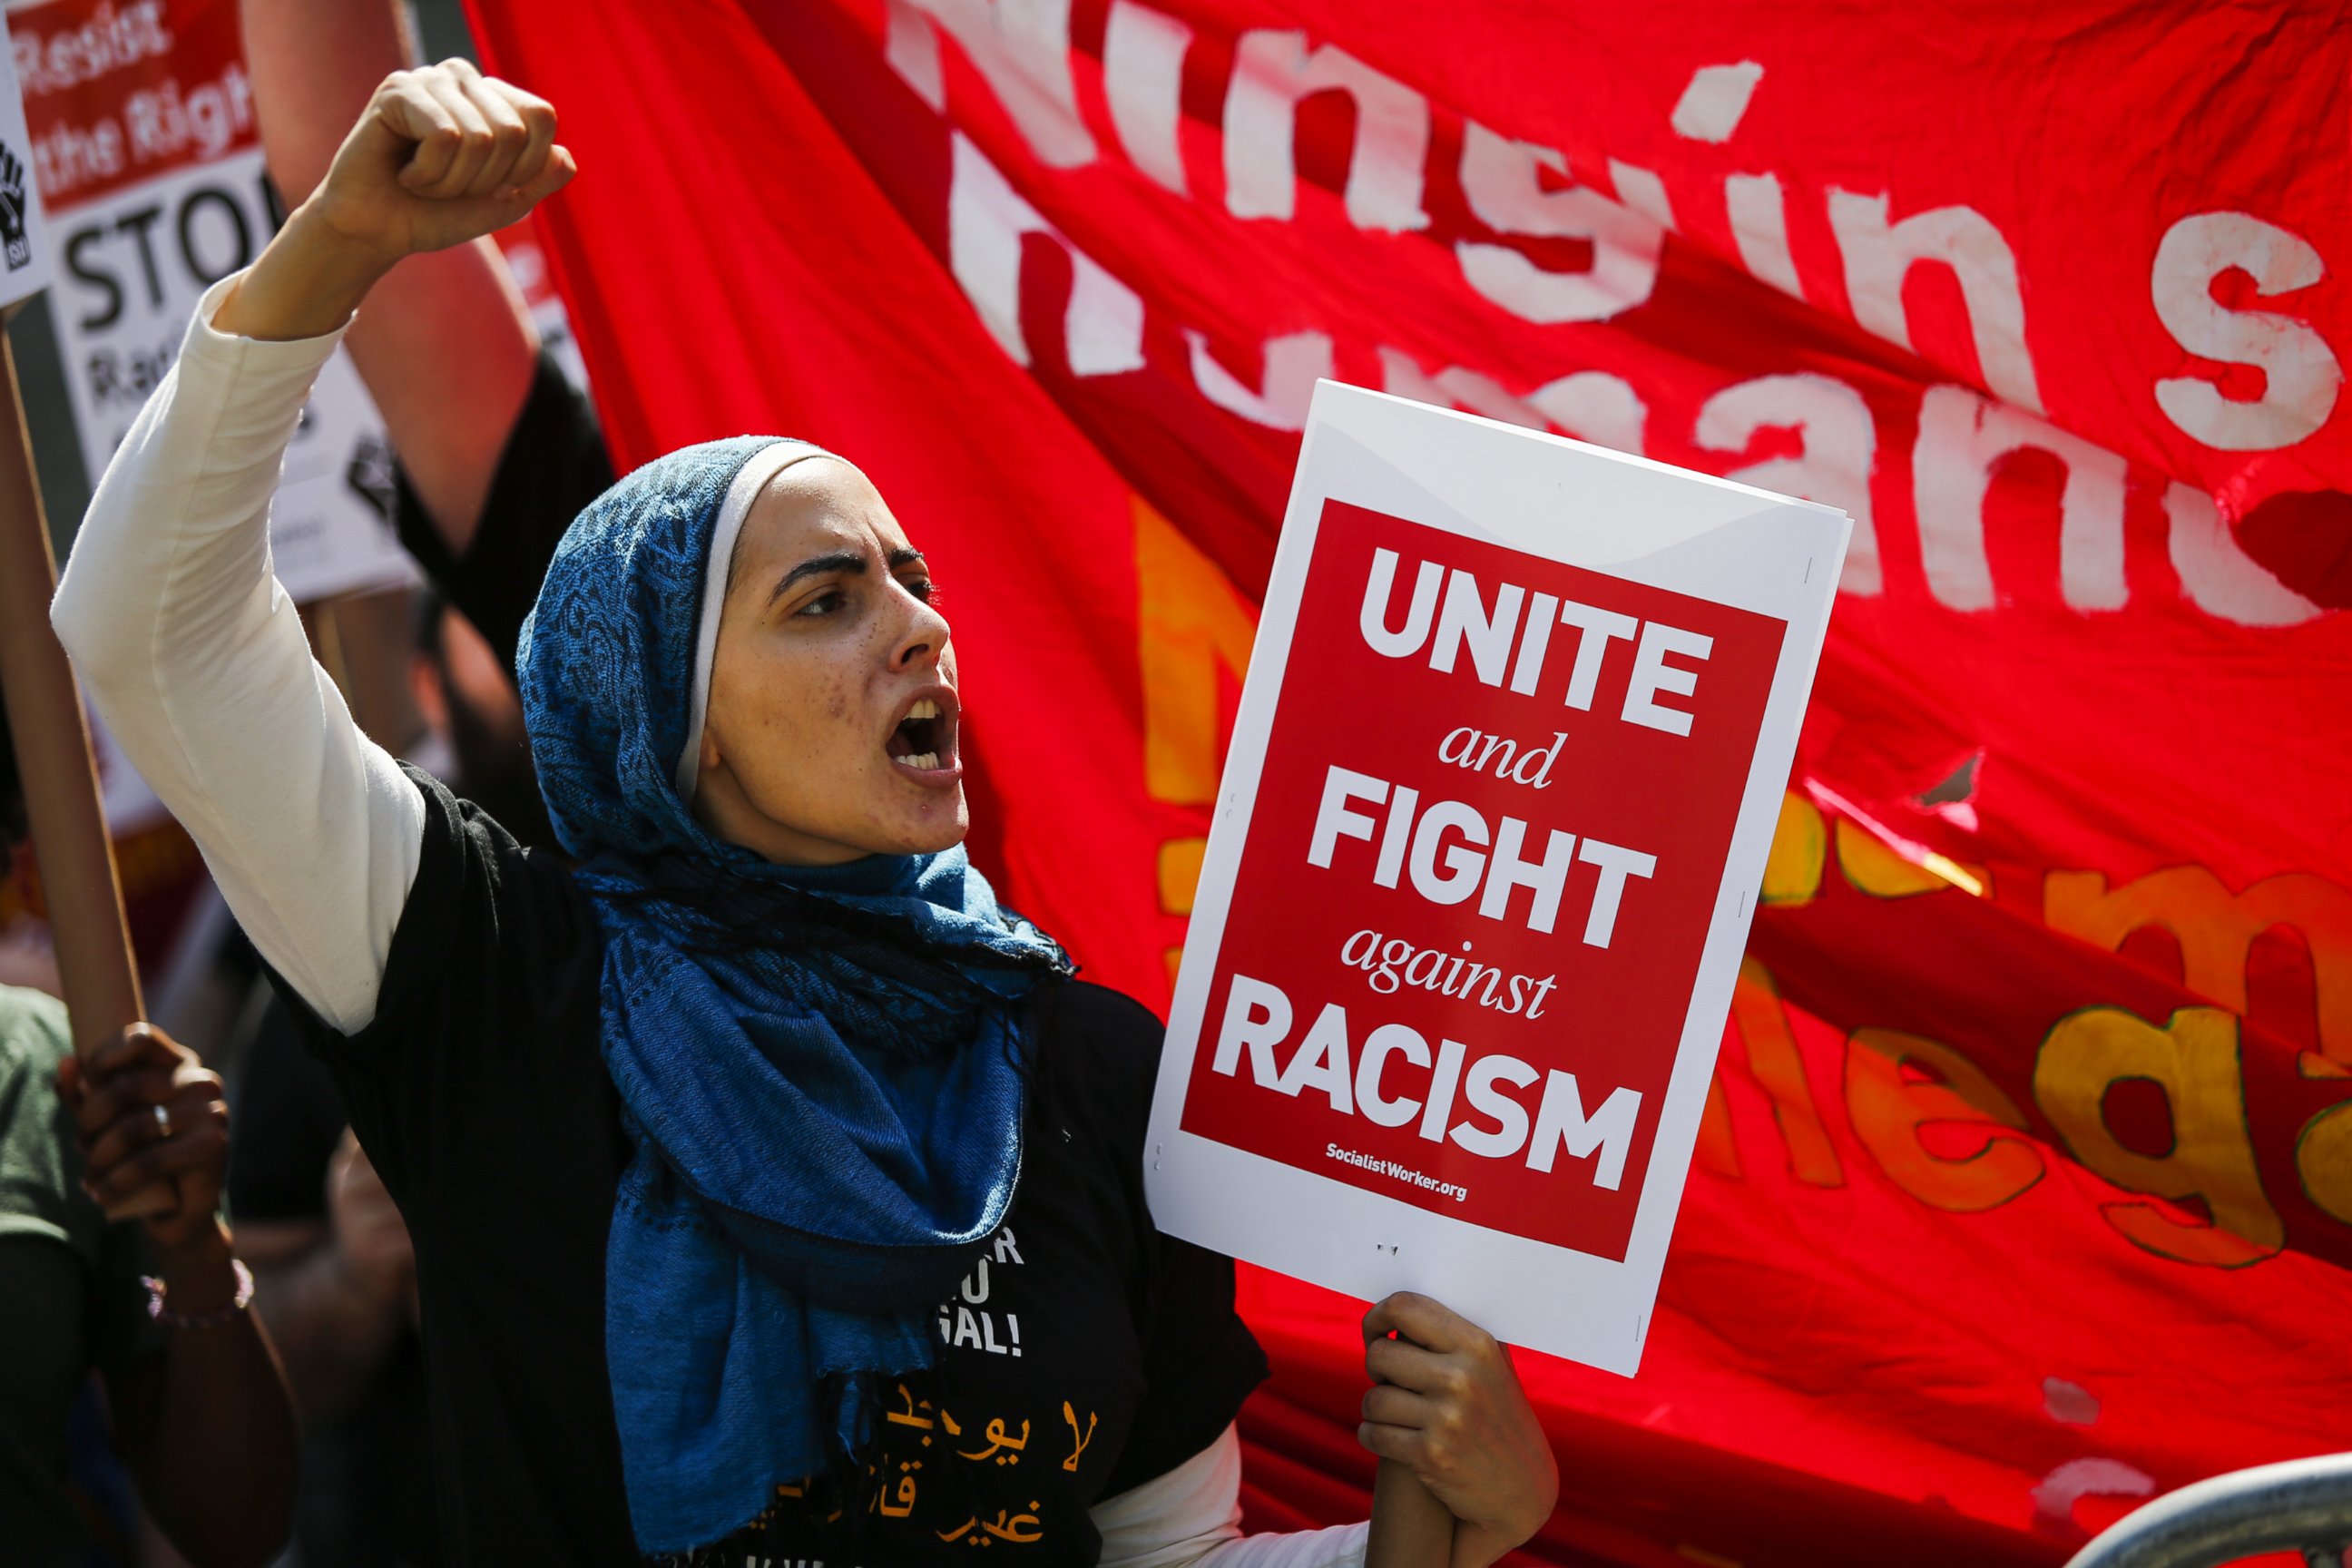 PHOTO: A woman shouts slogans as people march in support of Muslim community as activists take part in the "March Against Sharia" at Foley Square on June 10, 2017 in New York City. 